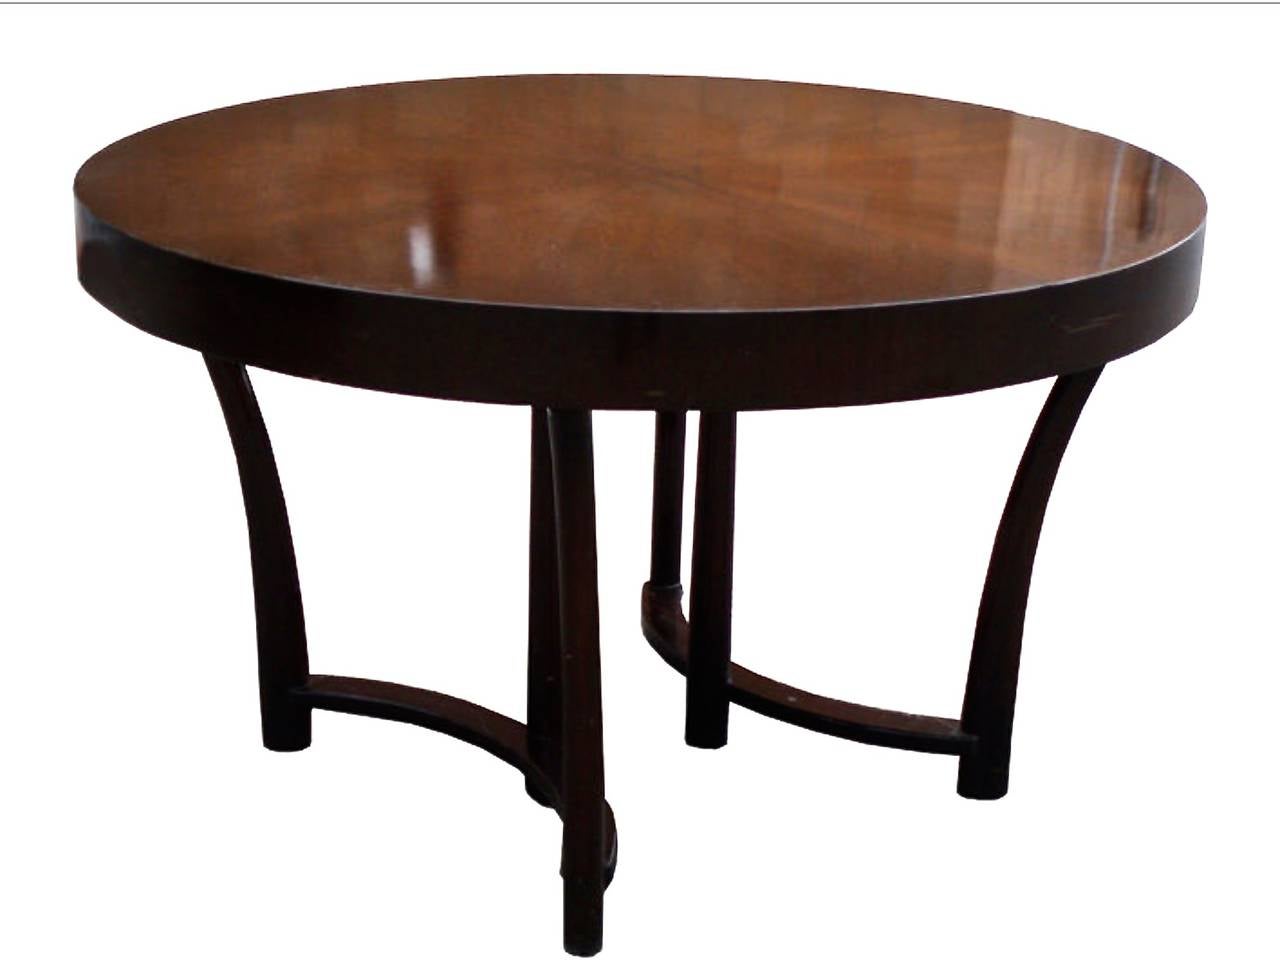 Newly refinished walnut dining table with unusual starburst veneer top and three extension leaves. Designed by T.H. Robsjohn-Gibbings for Widdicomb, USA, circa 1950s. This table can be transformed from round to elongated oval by the addition of one,